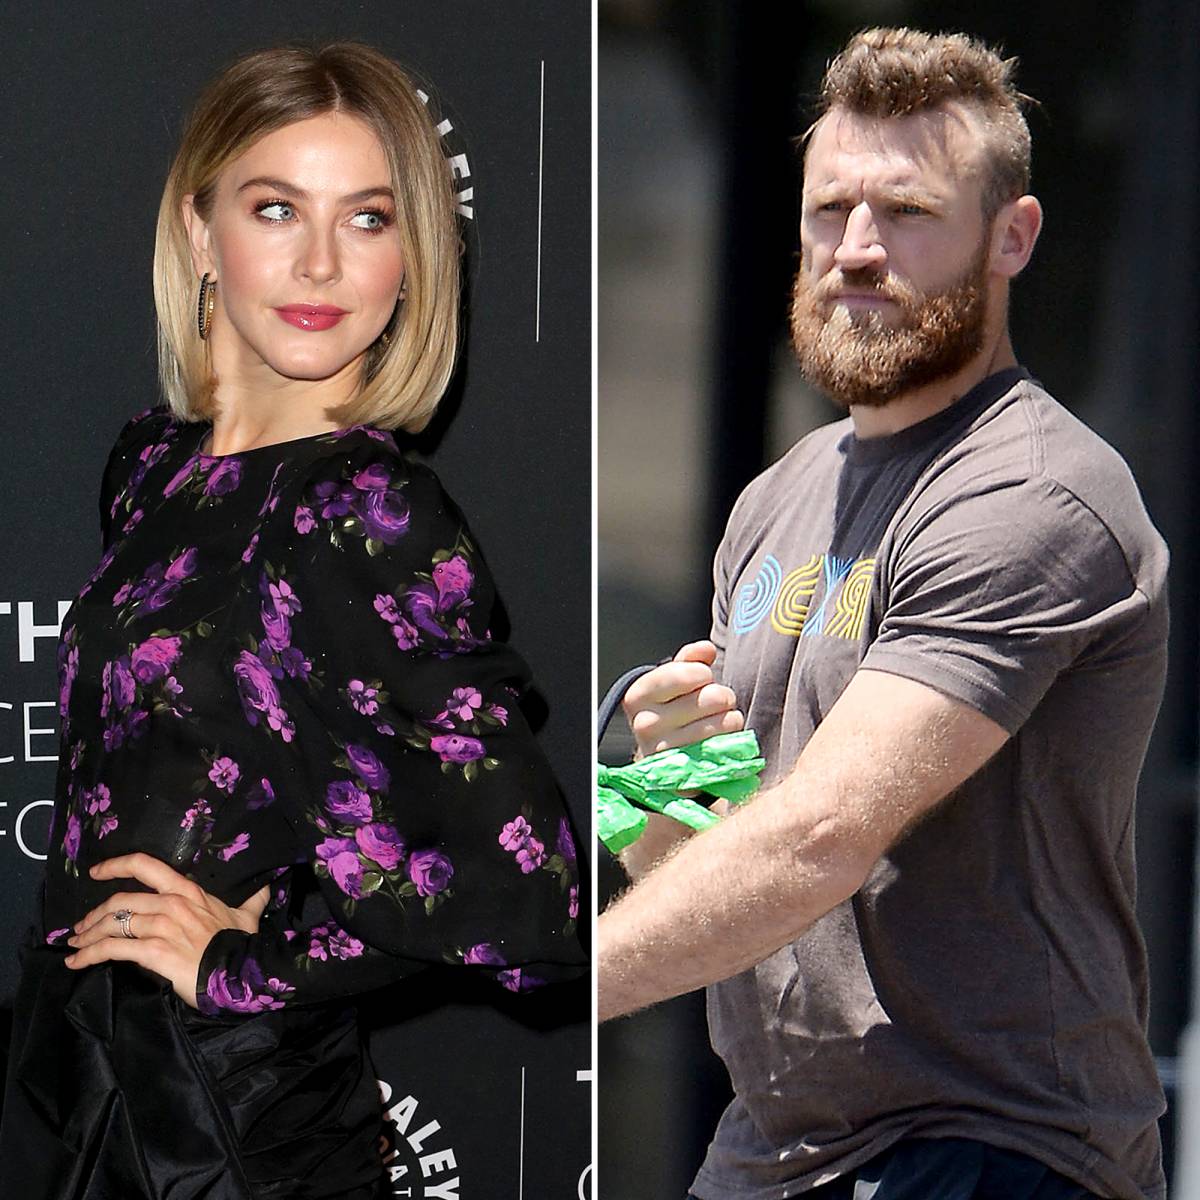 Former #NHL player #BrooksLaich has remained friendly with his ex-wife, brooks laich julianne hough